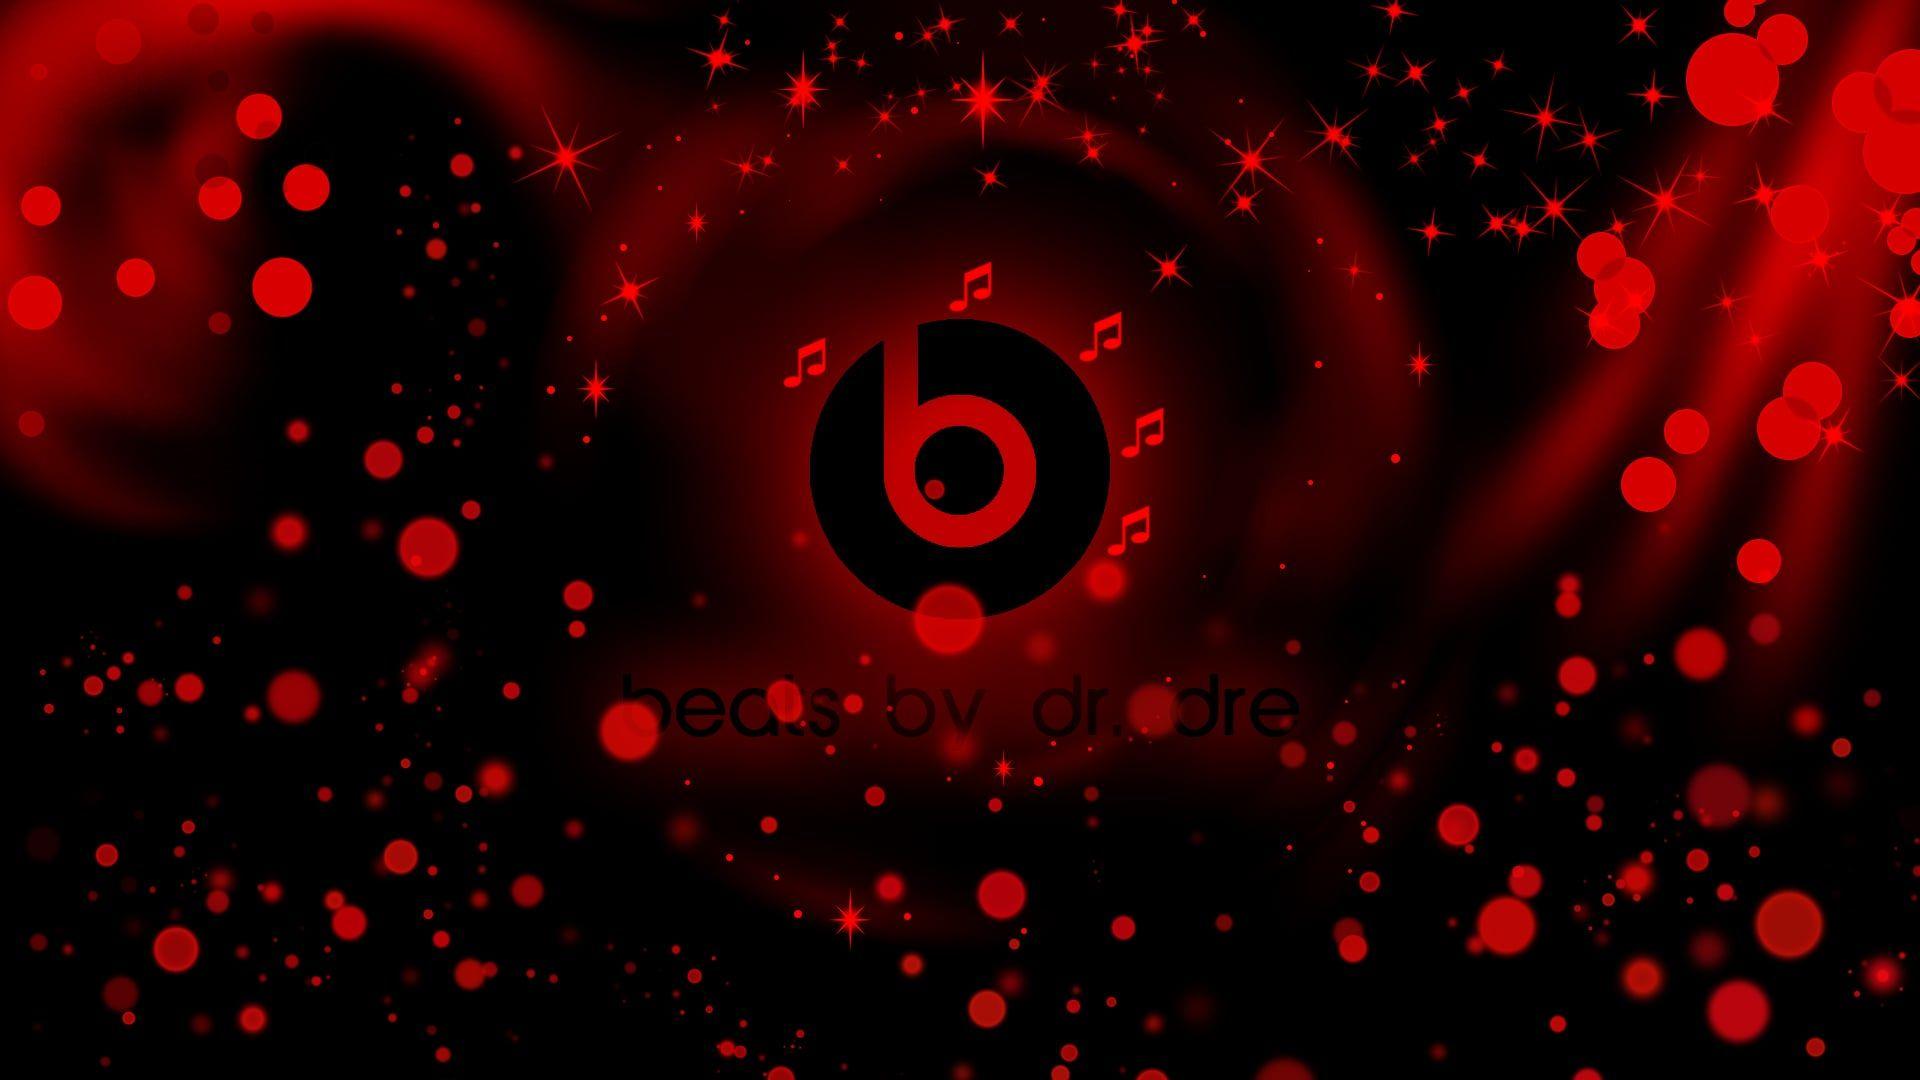 Red and Black Beats Logo - Beats By Dr Dre HD wallpaper Free Download Headphones